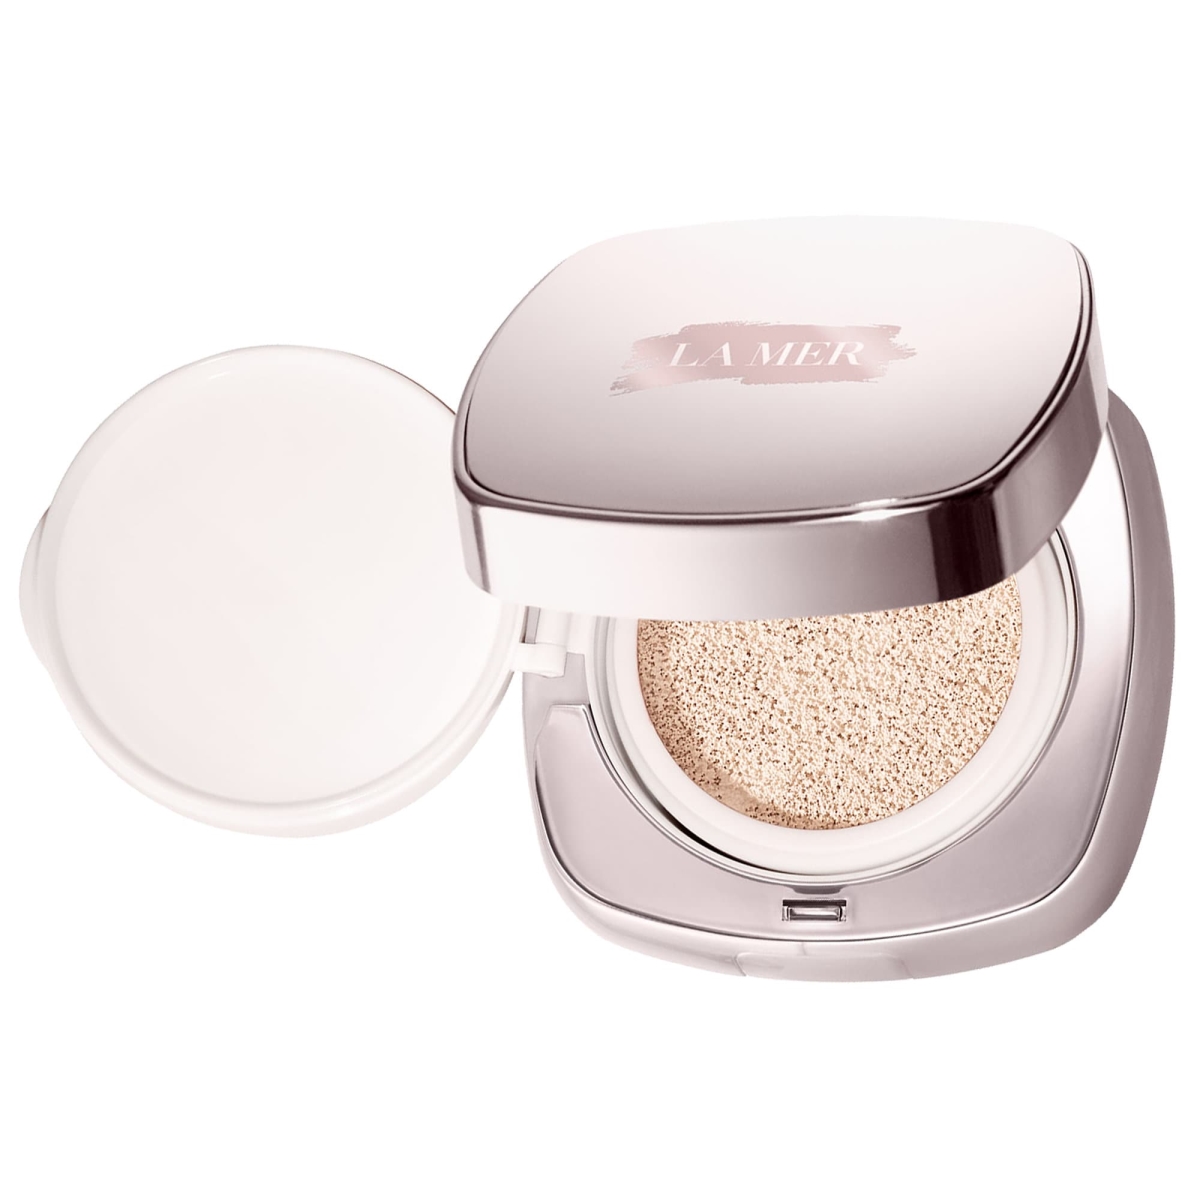 240207 0.42 Oz The Luminous Lifting Cushion Foundation Spf 20 With Extra Refill - No.12 Neutral Ivory